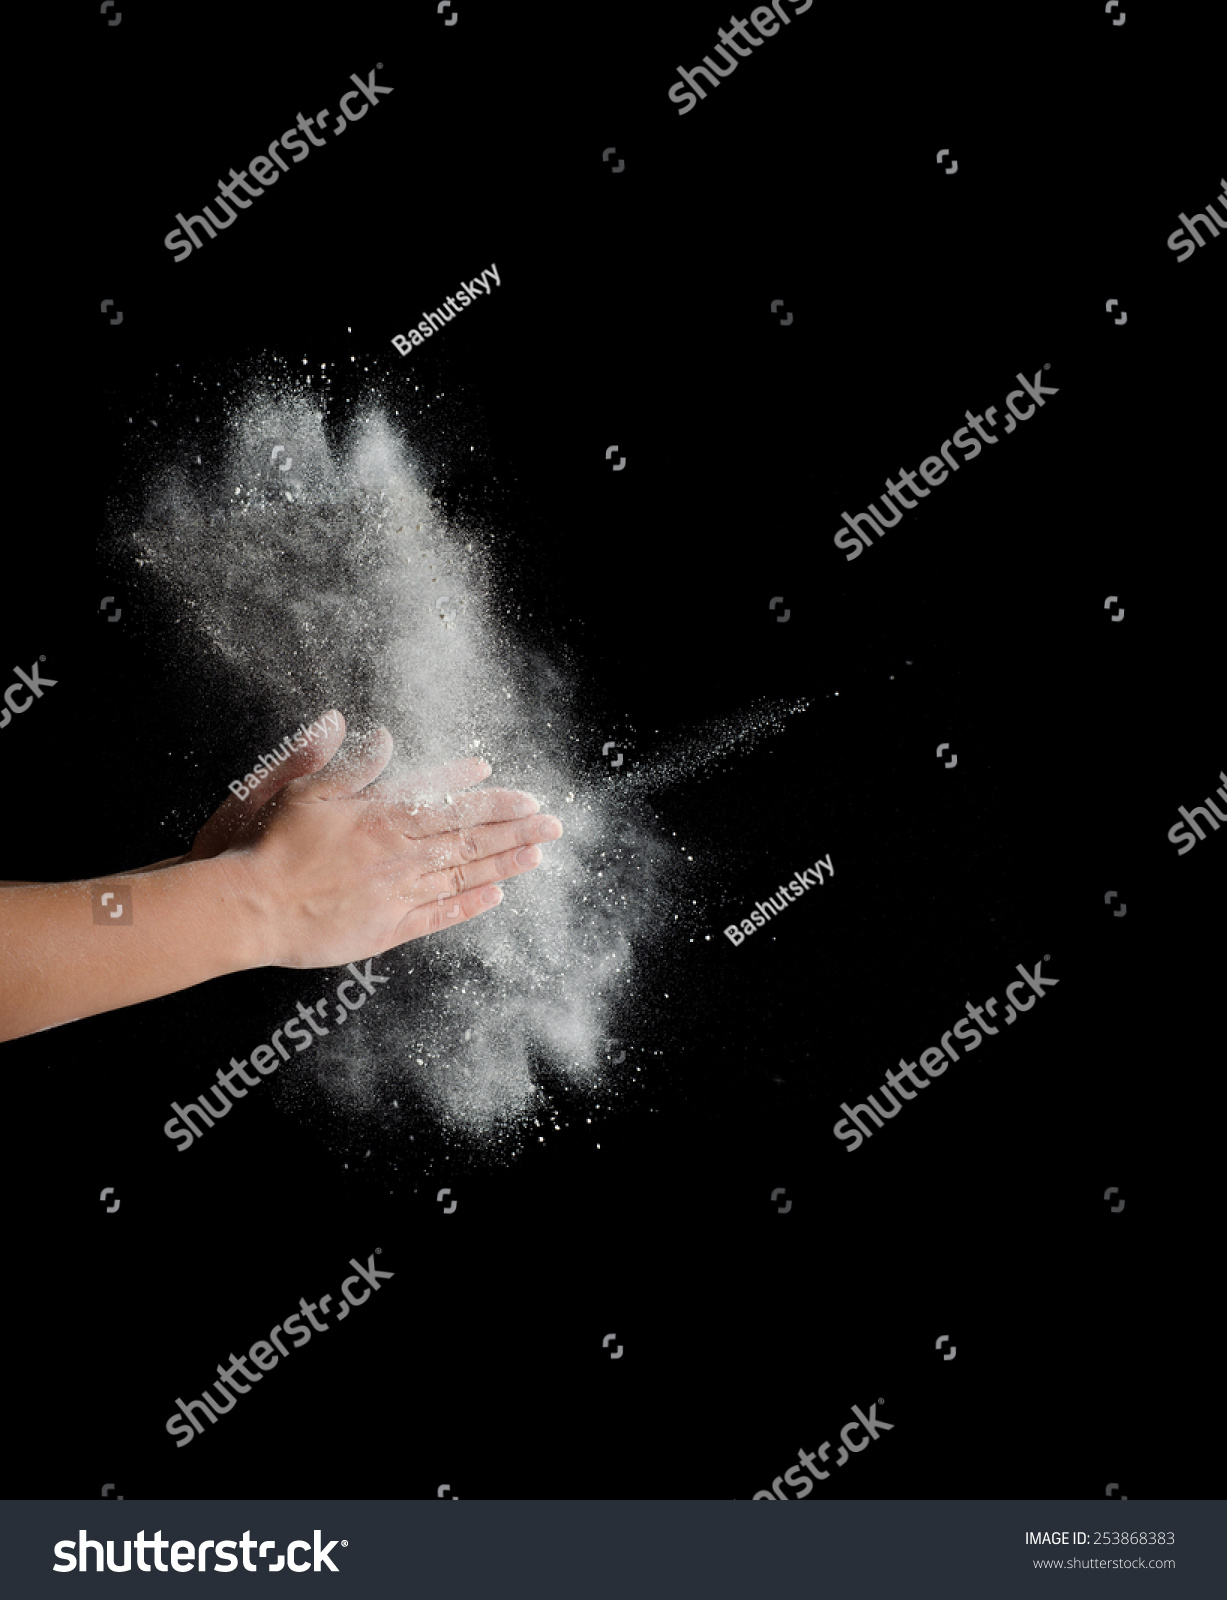 Freeze motion of dust explosion in hands isolated on black background #253868383